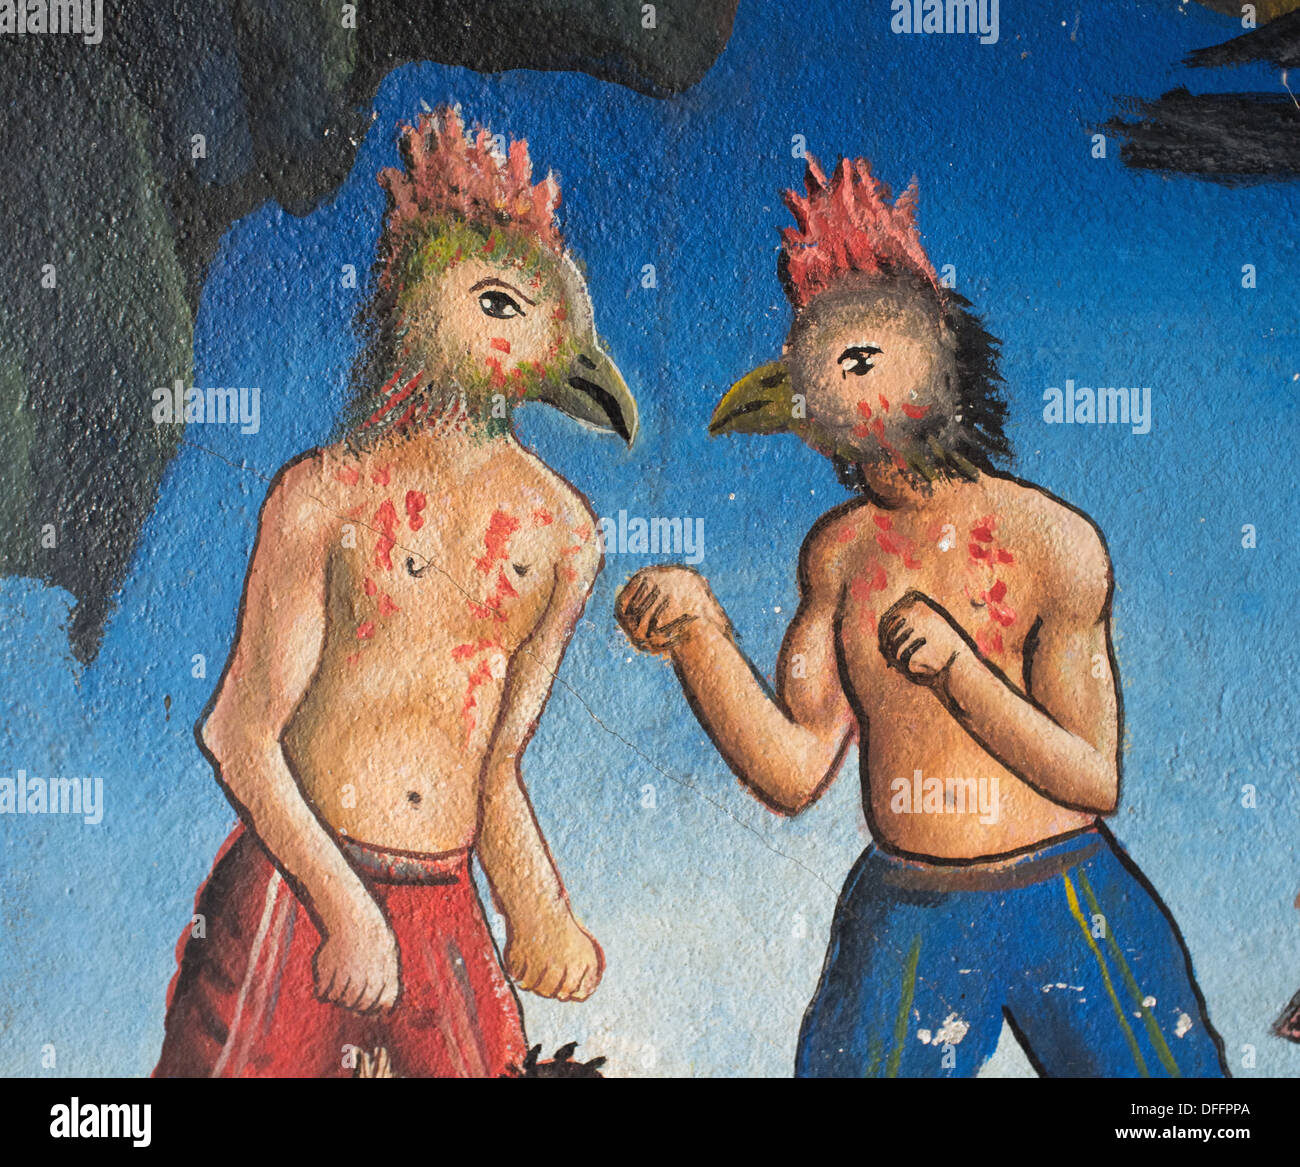 The karmic punishment for cockfighting, shown in a detail of a Cambodian temple mural depicting Buddhist Hell. Stock Photo